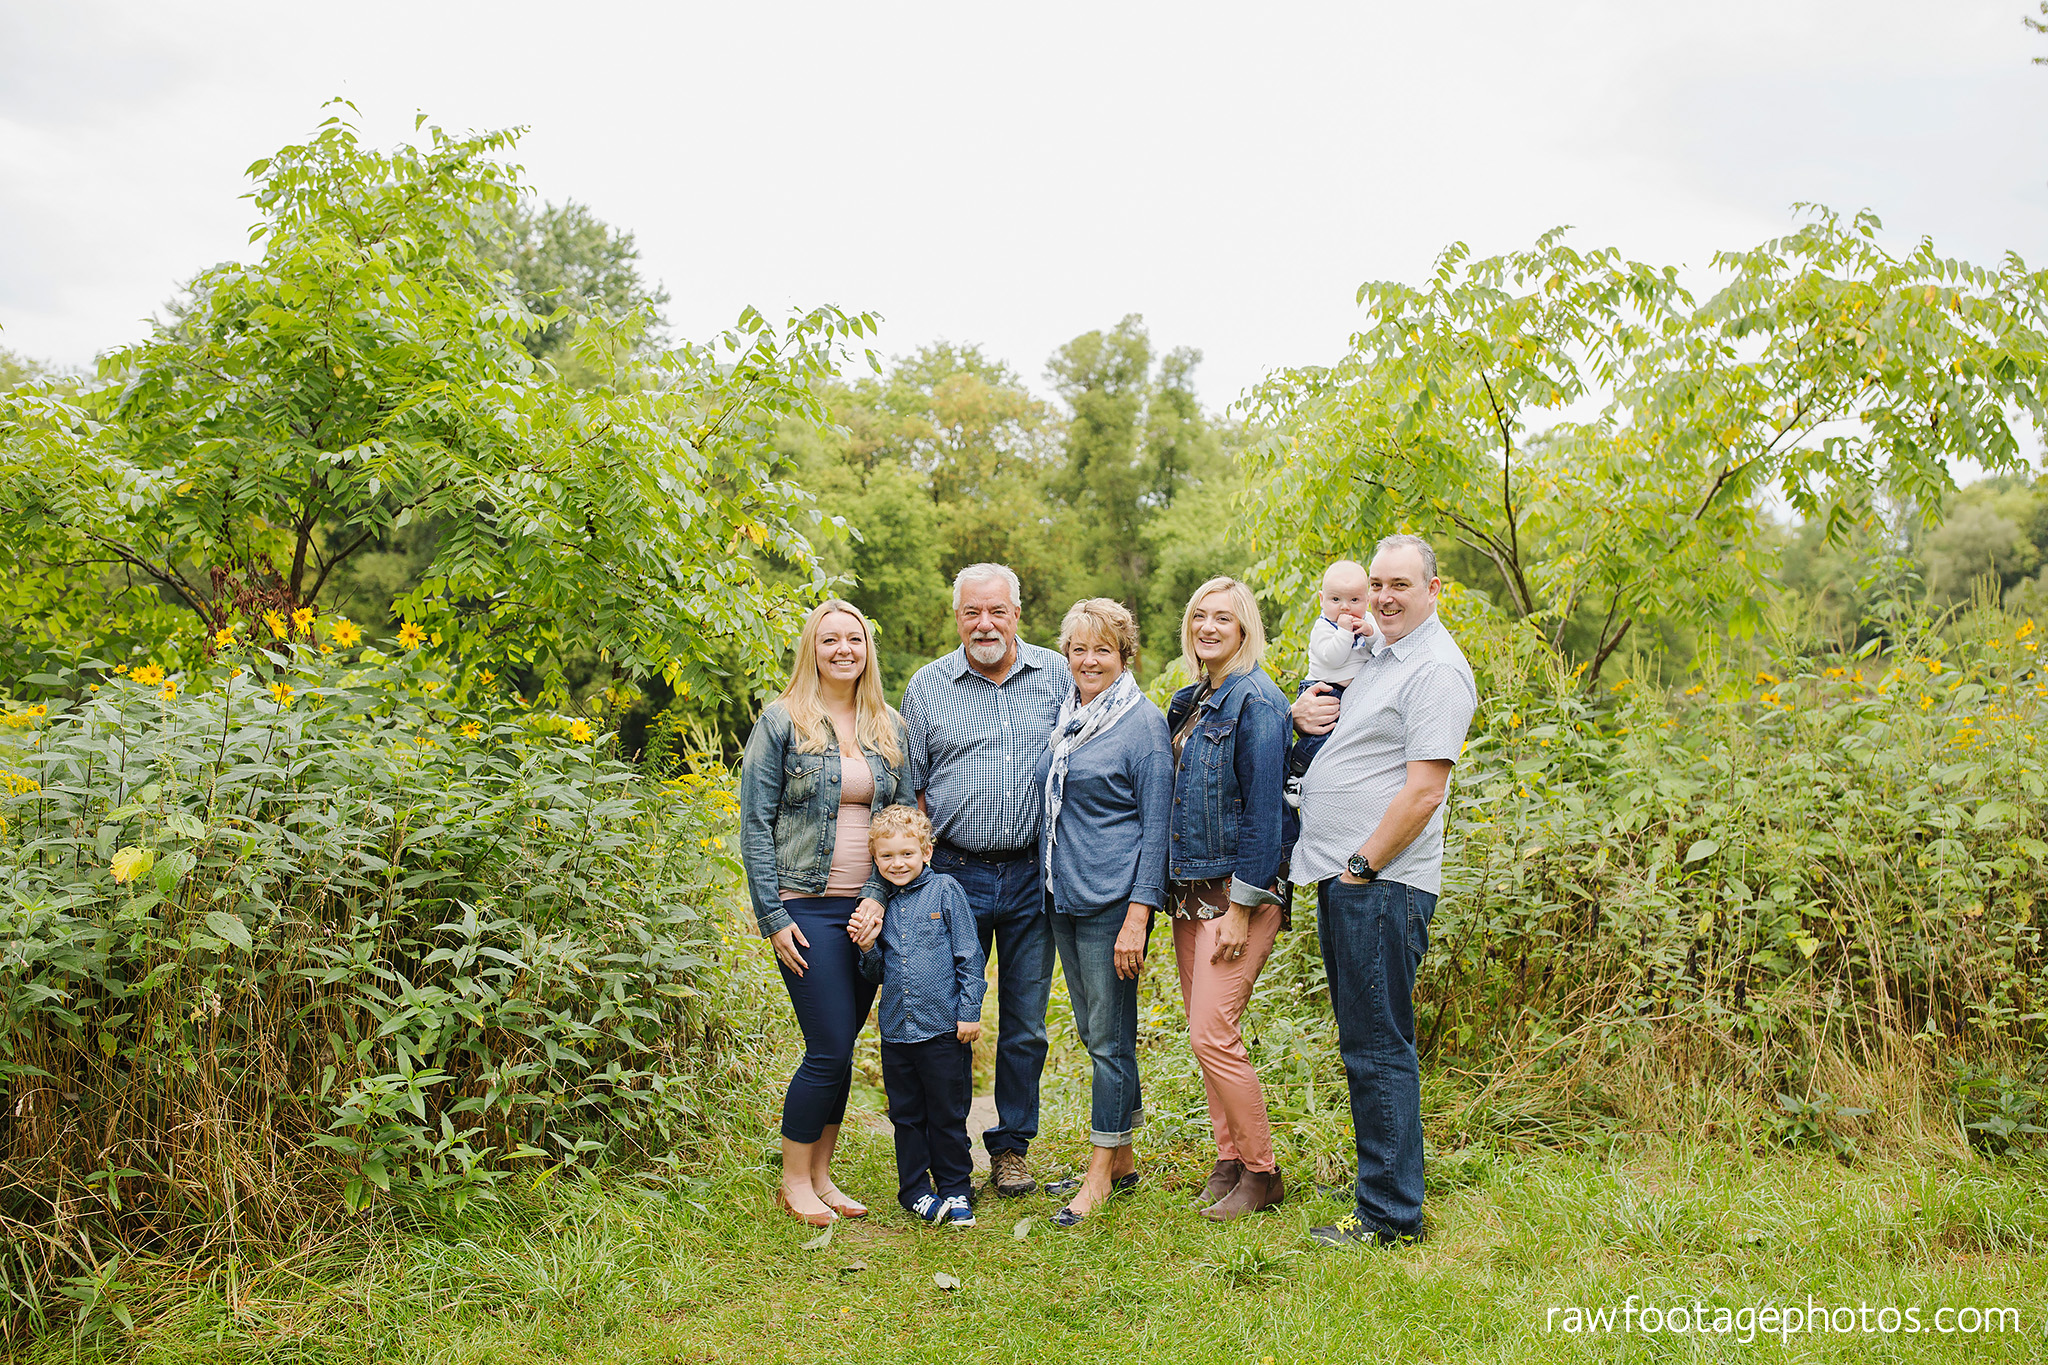 london_ontario_extended_family_photographer-raw_footage_photography001.jpg